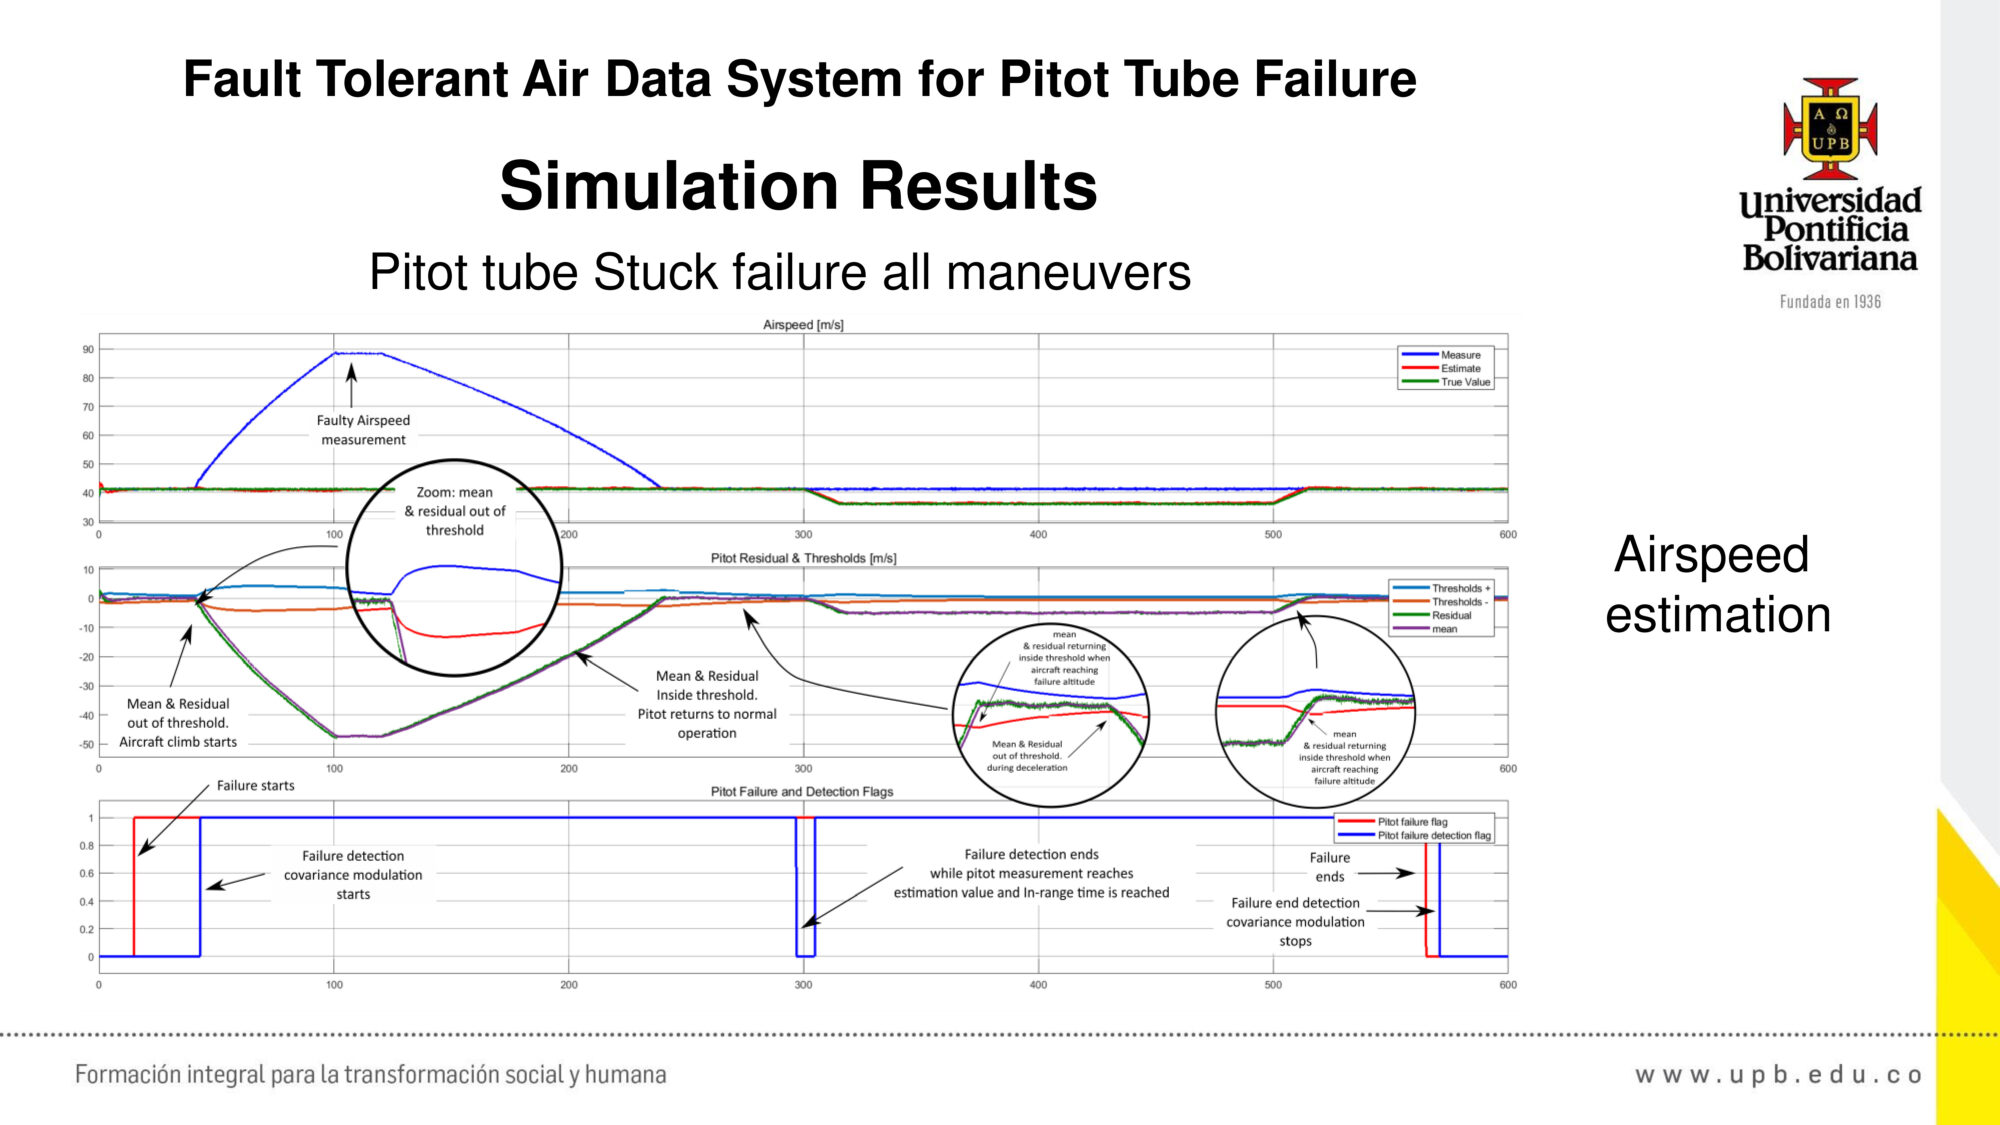 Fault tolerant air data system for pitot failure simulation results